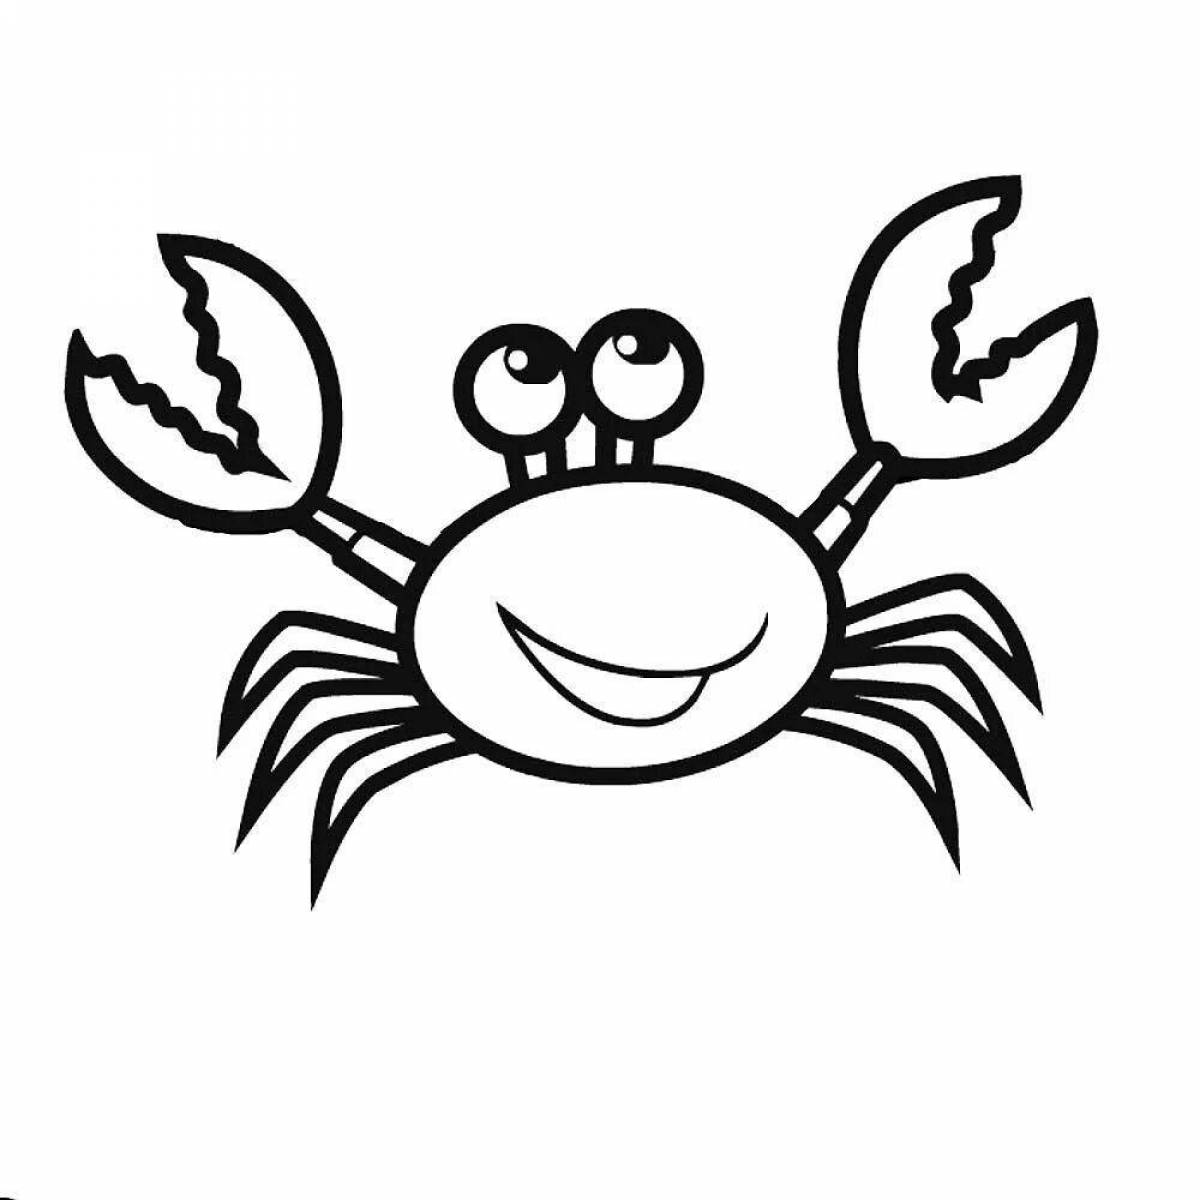 Crab for kids #17